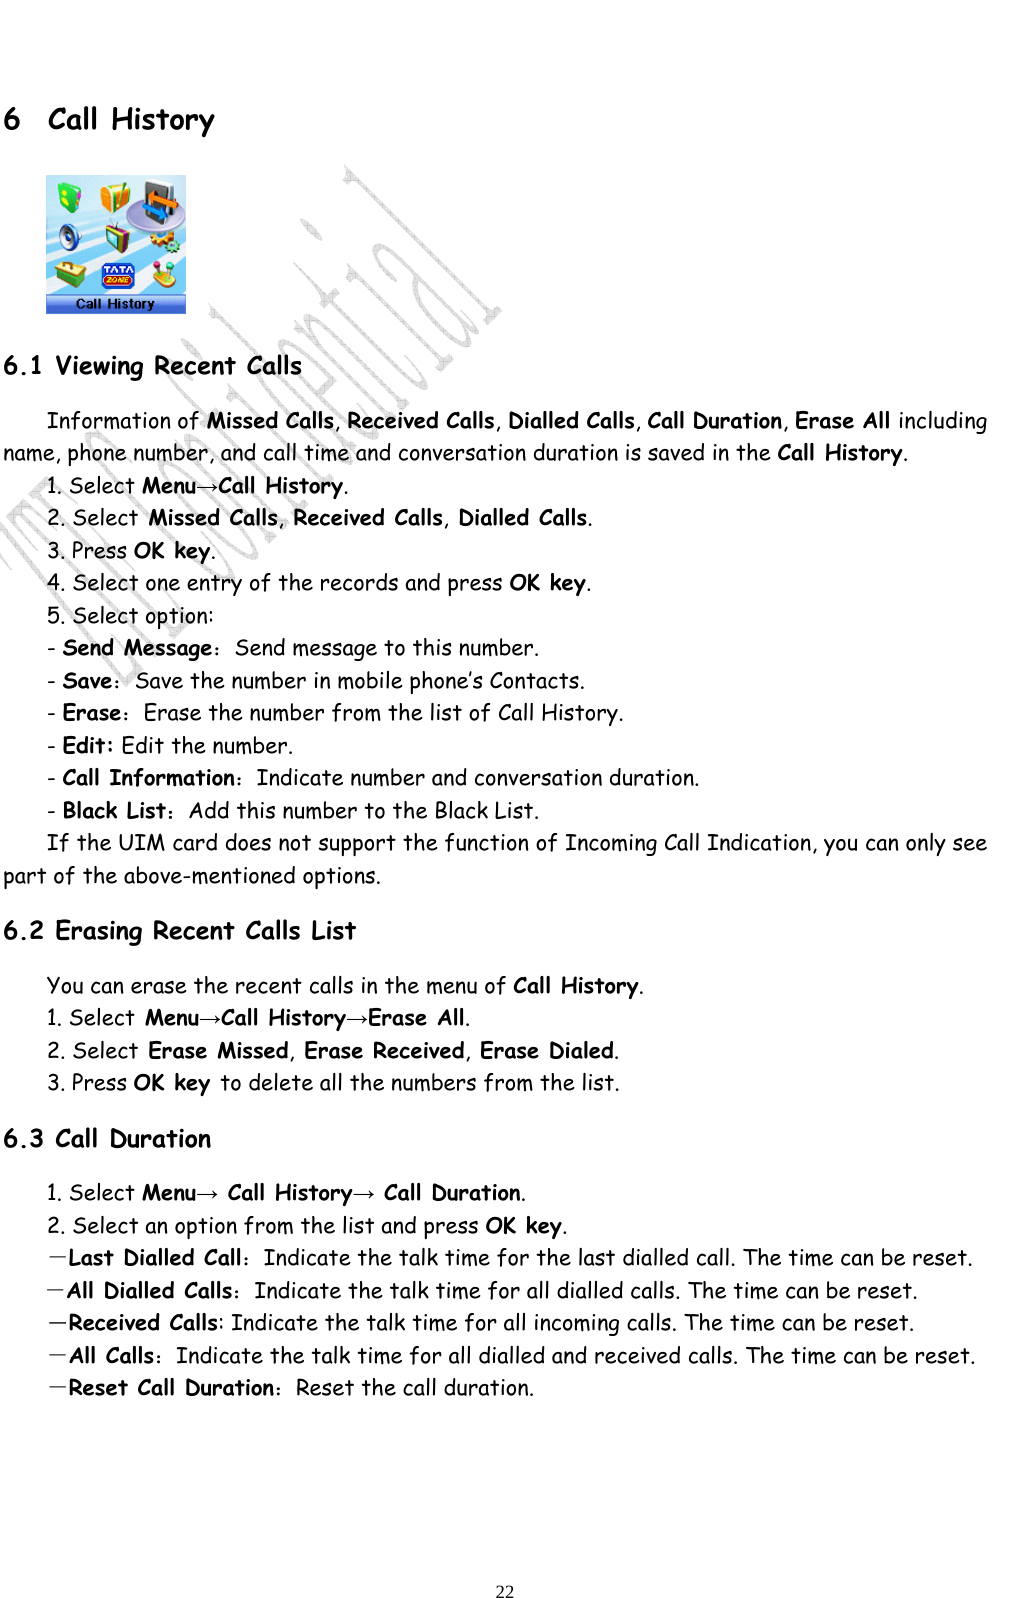                              22 6 Call History  6.1 Viewing Recent Calls Information of Missed Calls, Received Calls, Dialled Calls, Call Duration, Erase All including name, phone number, and call time and conversation duration is saved in the Call History. 1. Select Menu→Call History. 2. Select Missed Calls, Received Calls, Dialled Calls.  3. Press OK key. 4. Select one entry of the records and press OK key. 5. Select option: - Send Message：Send message to this number. - Save：Save the number in mobile phone’s Contacts. - Erase：Erase the number from the list of Call History. - Edit: Edit the number. - Call Information：Indicate number and conversation duration. - Black List：Add this number to the Black List. If the UIM card does not support the function of Incoming Call Indication, you can only see part of the above-mentioned options. 6.2 Erasing Recent Calls List You can erase the recent calls in the menu of Call History. 1. Select Menu→Call History→Erase All. 2. Select Erase Missed, Erase Received, Erase Dialed.  3. Press OK key to delete all the numbers from the list. 6.3 Call Duration 1. Select Menu→ Call History→ Call Duration. 2. Select an option from the list and press OK key. －Last Dialled Call：Indicate the talk time for the last dialled call. The time can be reset.   －All Dialled Calls：Indicate the talk time for all dialled calls. The time can be reset.   －Received Calls: Indicate the talk time for all incoming calls. The time can be reset.   －All Calls：Indicate the talk time for all dialled and received calls. The time can be reset.   －Reset Call Duration：Reset the call duration.  